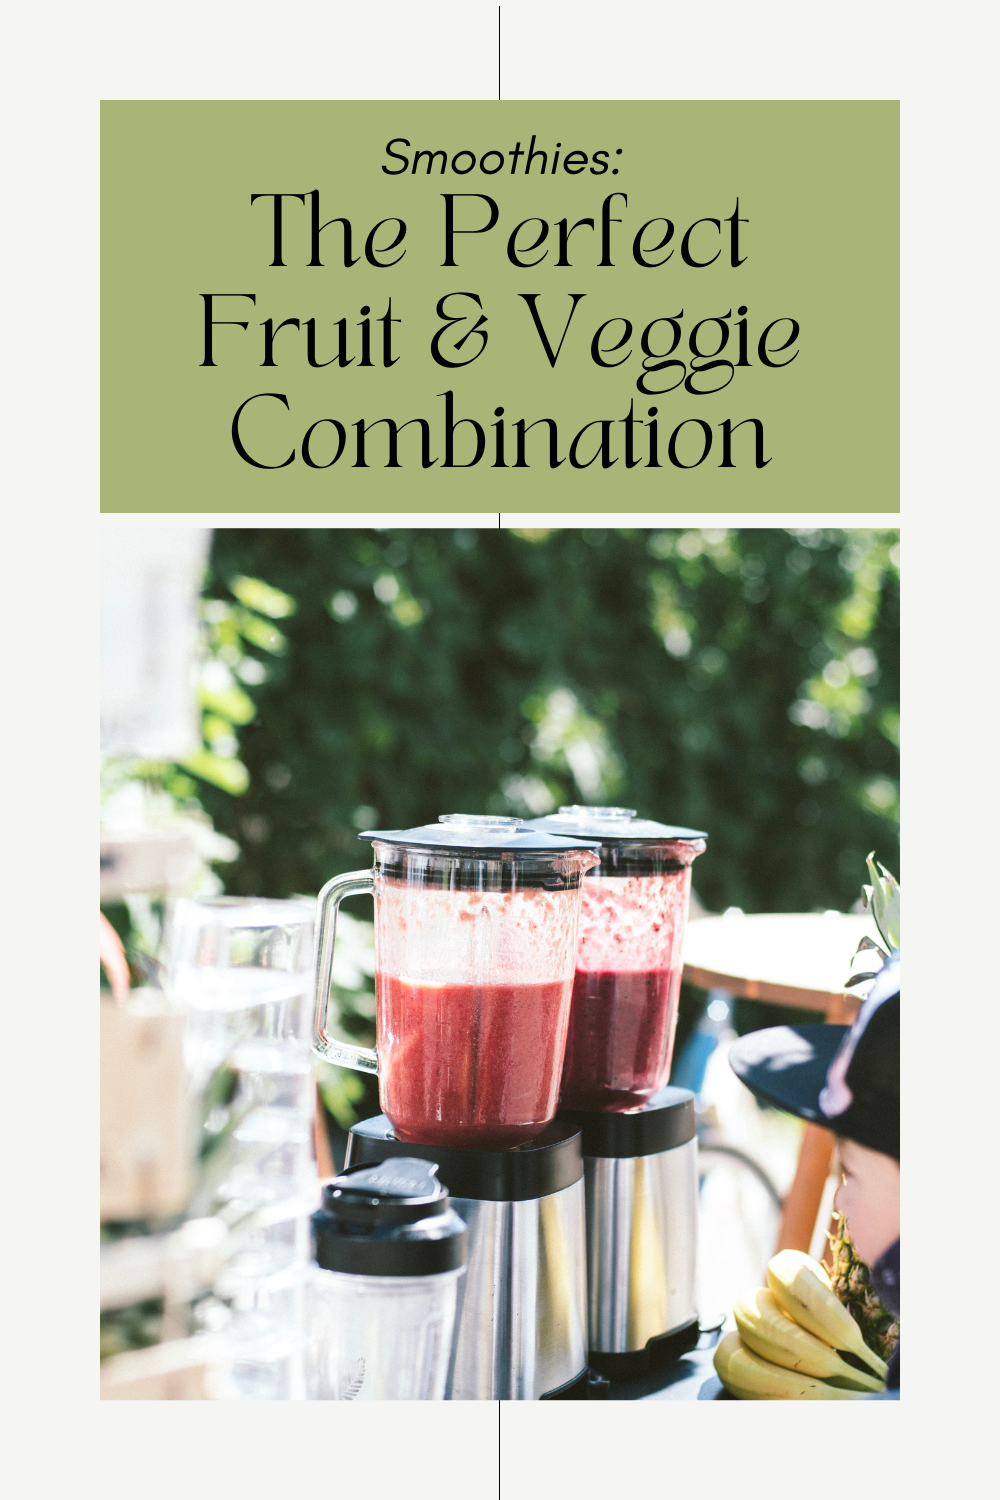 Two blender machines sit on a table to make smoothies. This article covers the perfect combination of fruits and vegetables for smoothies.